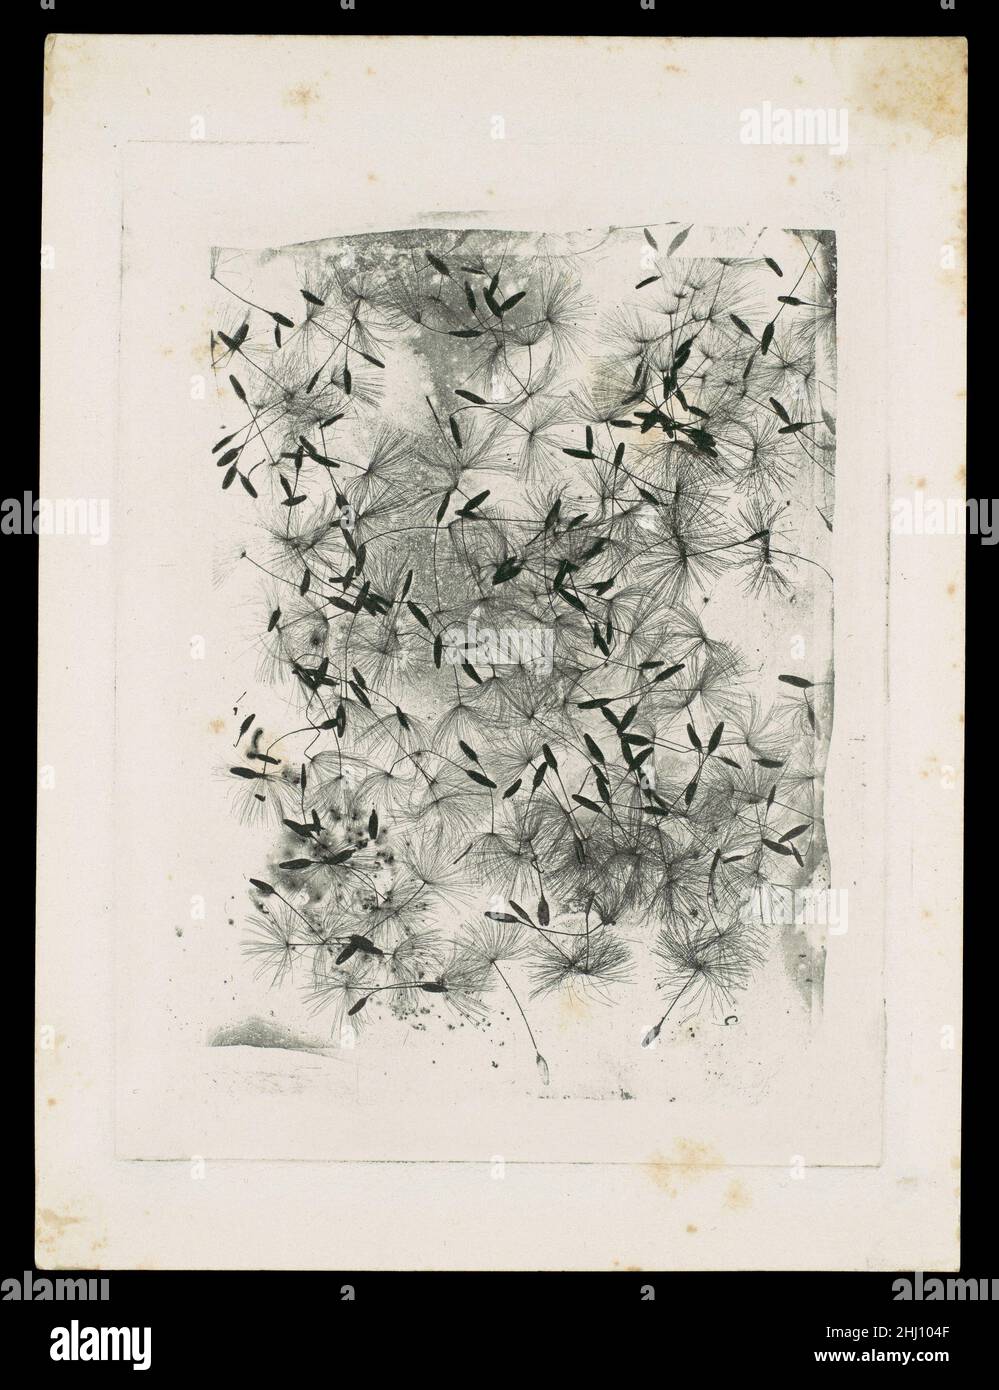 [Dandelion Seeds] 1858 or later William Henry Fox Talbot British This experimental proof is a fine example of the capacity of Talbot's 'photoglyphic engraving' to produce photographic results that could be printed on a press, using printer's ink-a more permanent process than photographs made with light and chemicals. Like Talbot's earliest photographic examples, the image here was photographically transferred to the copper engraving plate by laying the seeds directly on the photosensitized plate and exposing it to light, without the aid of a camera. Equally reminiscent of Talbot's early experi Stock Photo